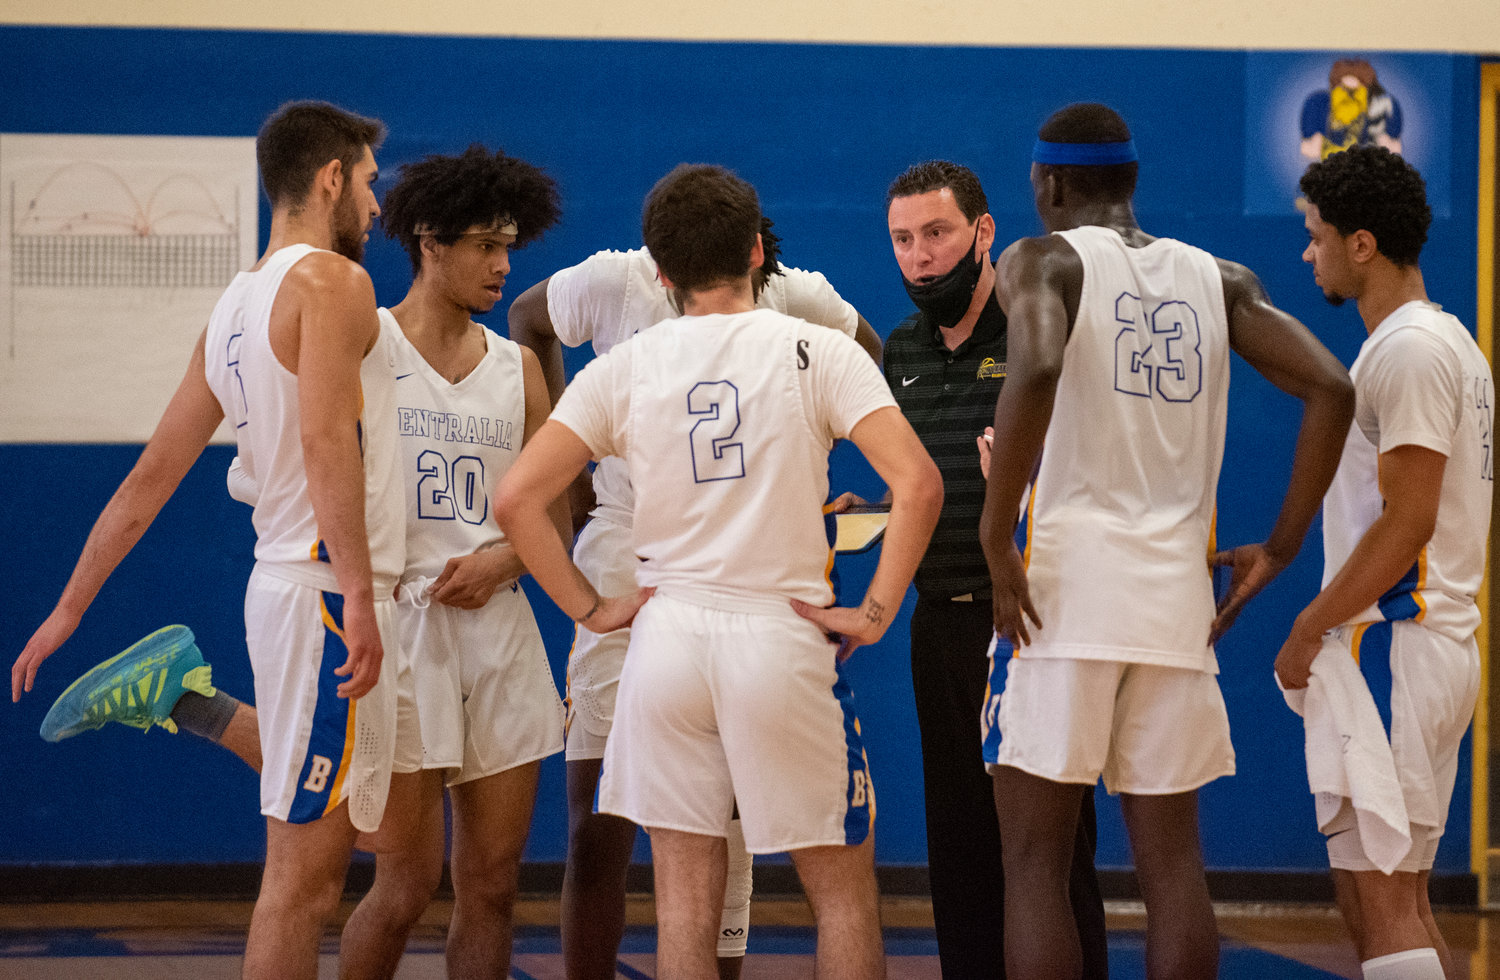 Centralia College coach Jason Moir gives instructions to his team during a timeout on Friday.